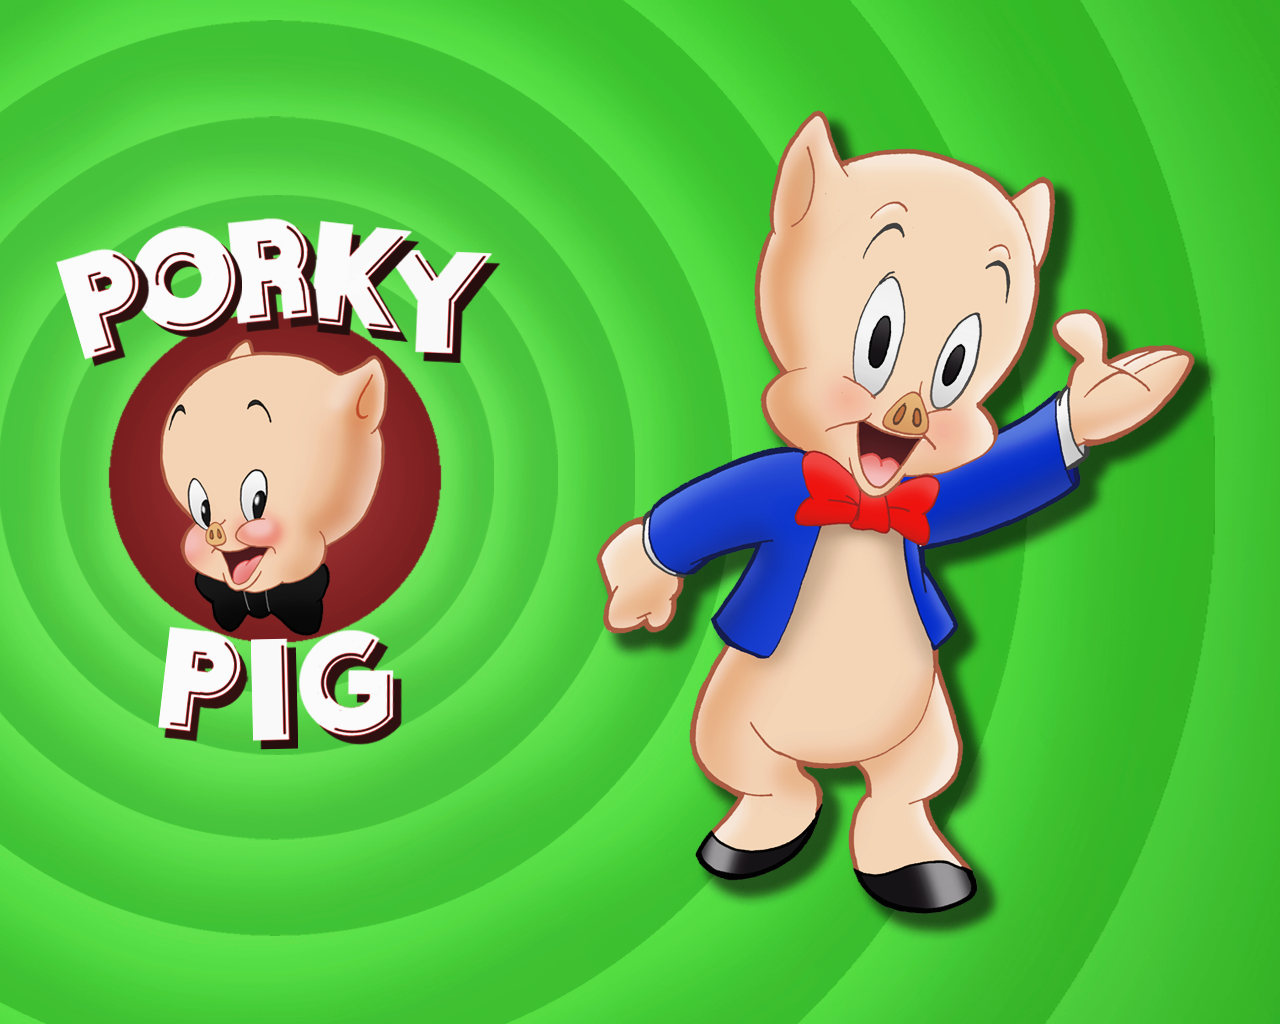 Porky_Pig_Wallpaper_by_E__Psi-png